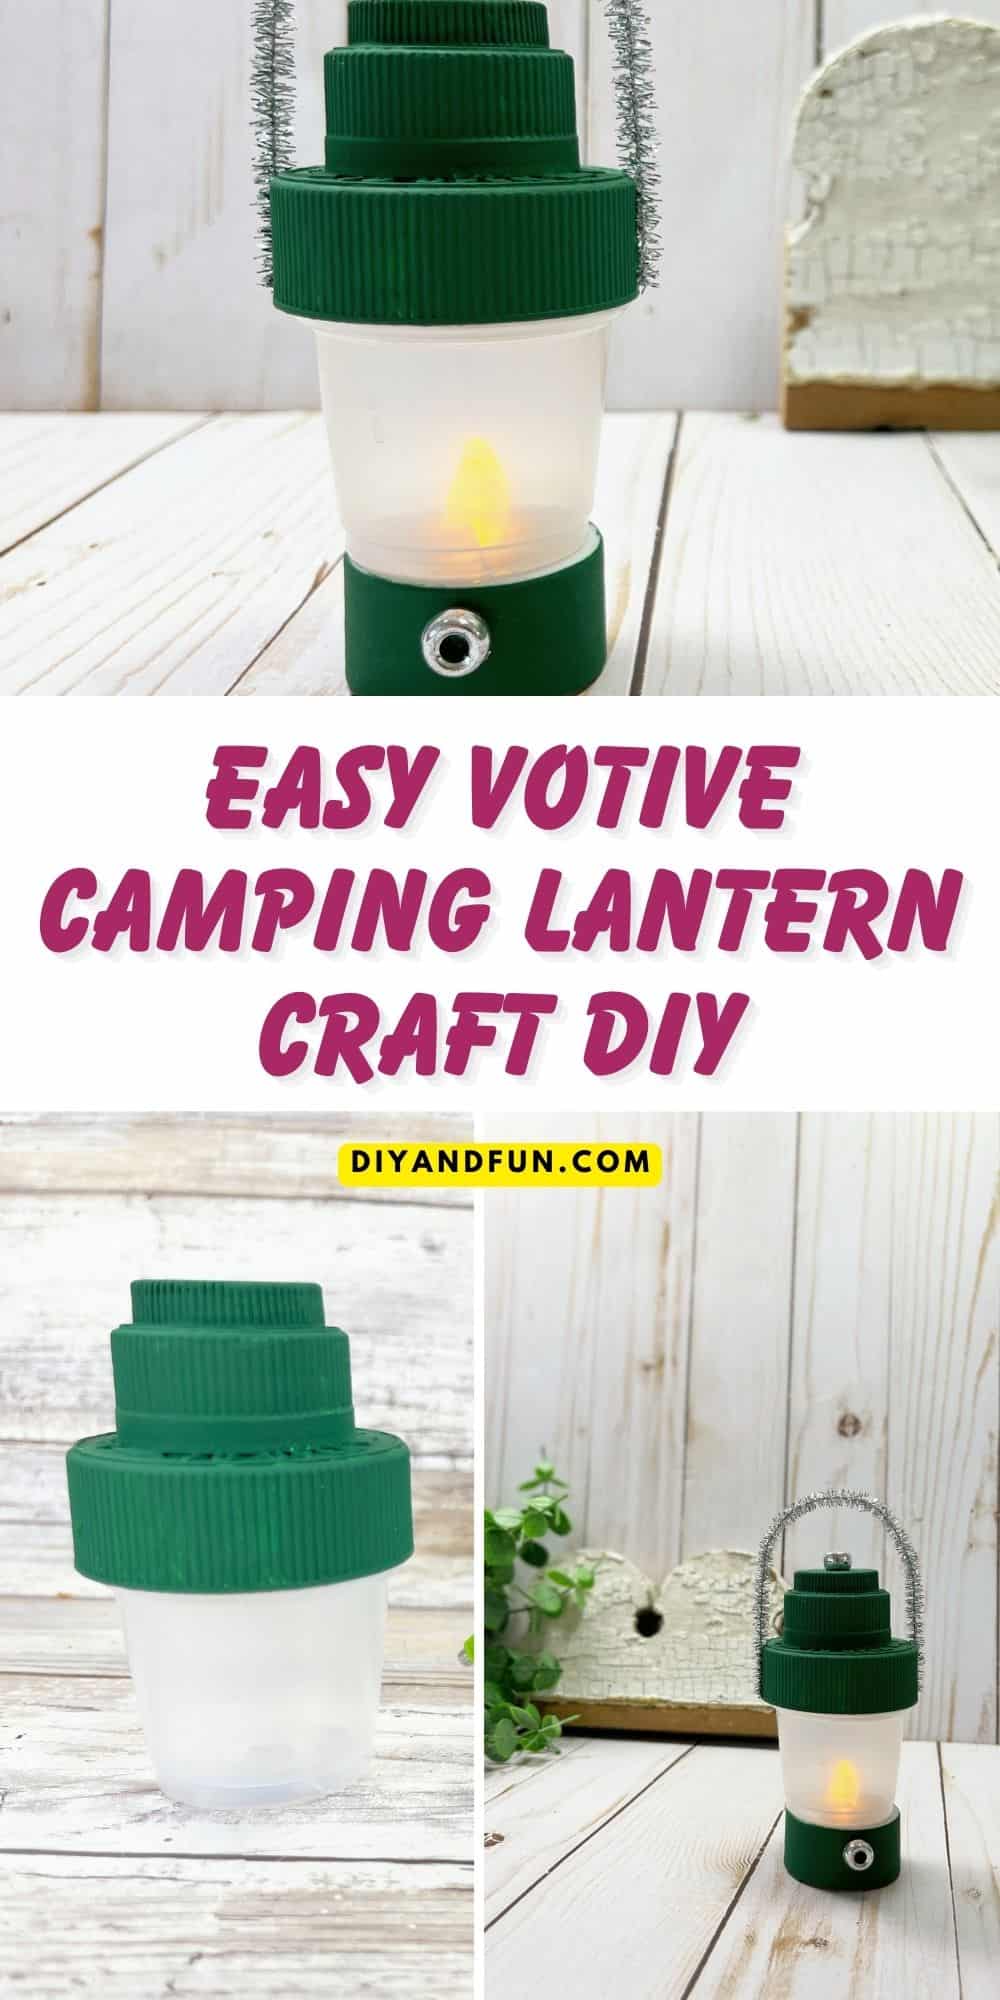 Easy Votive Camping Lantern Craft DIY, a simple craft idea that is suitable for many ages and made with dollar store and upcycled materials #kidscraft #campingcraft